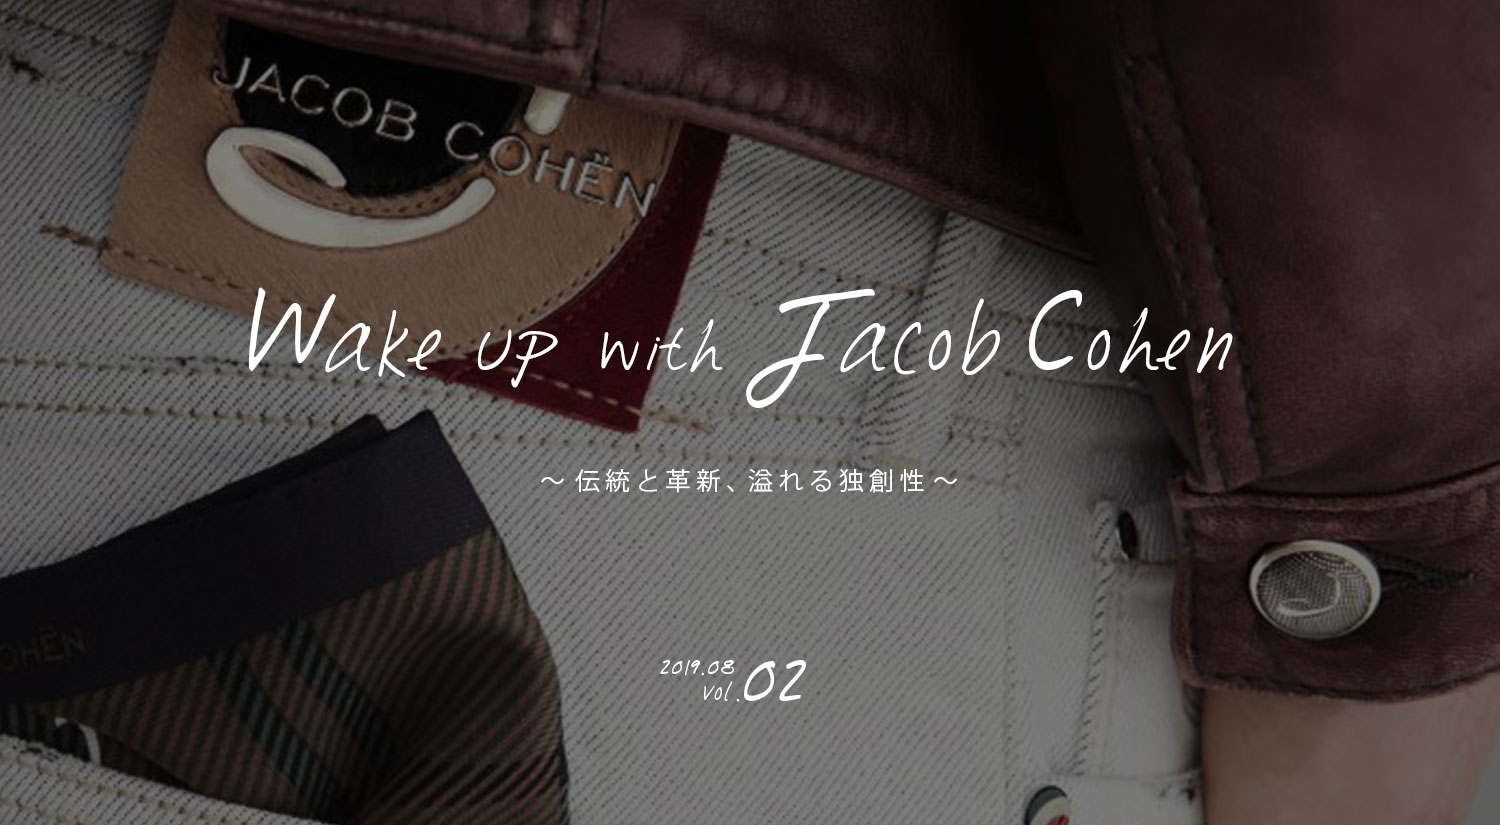 Wake up with Jacob cohen Vol.02